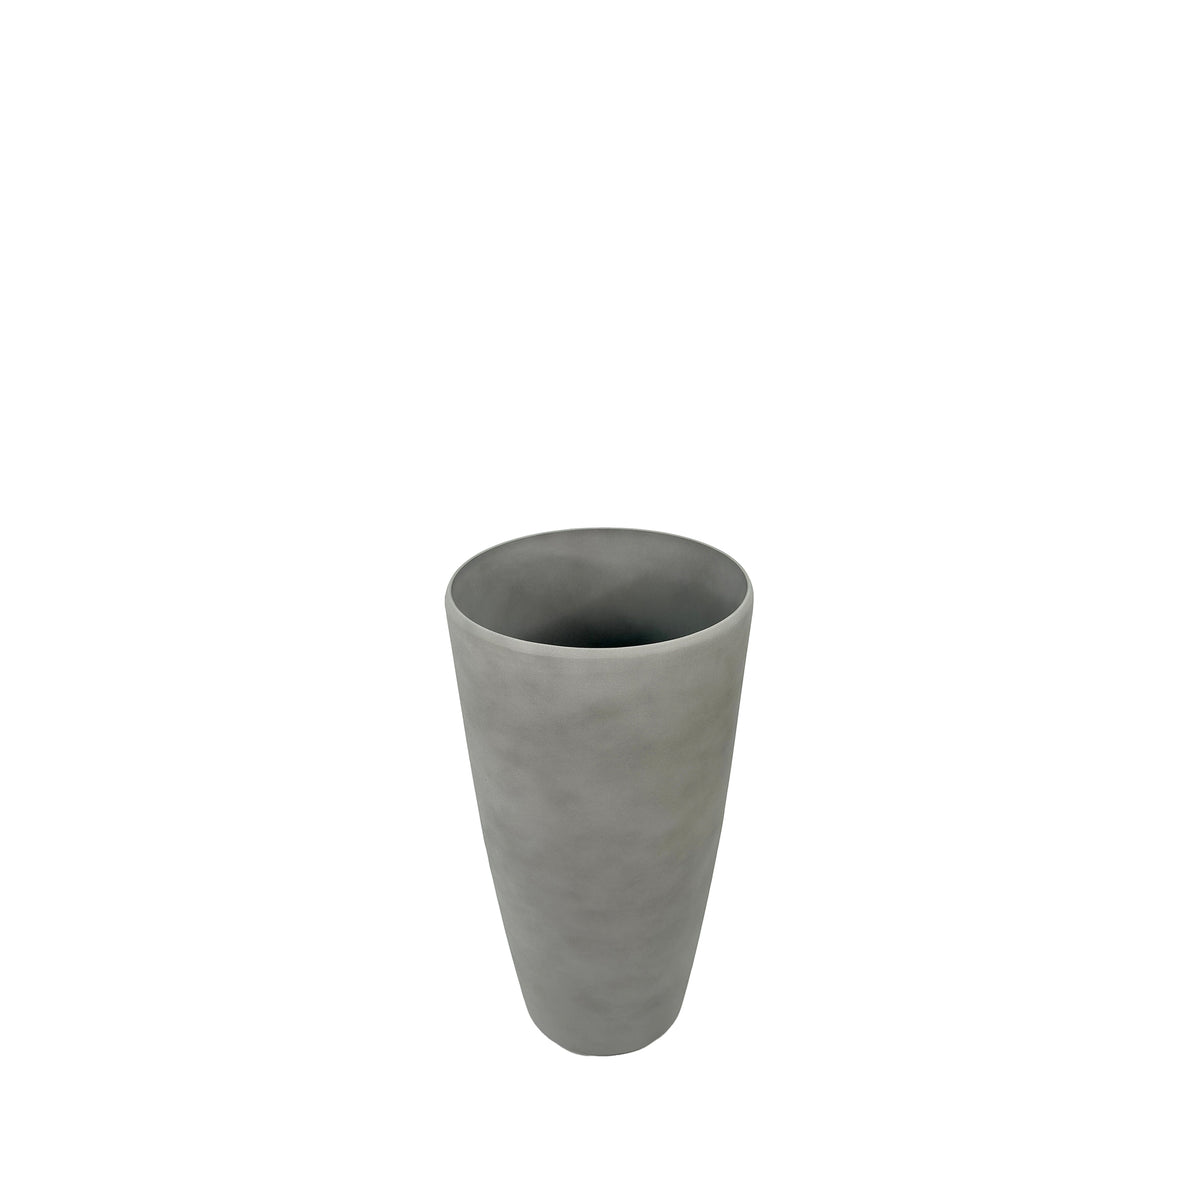 42cm Sage grey planter, Cement like finish, Small, lightweight, Eco friendly and Weather proof, Front view.